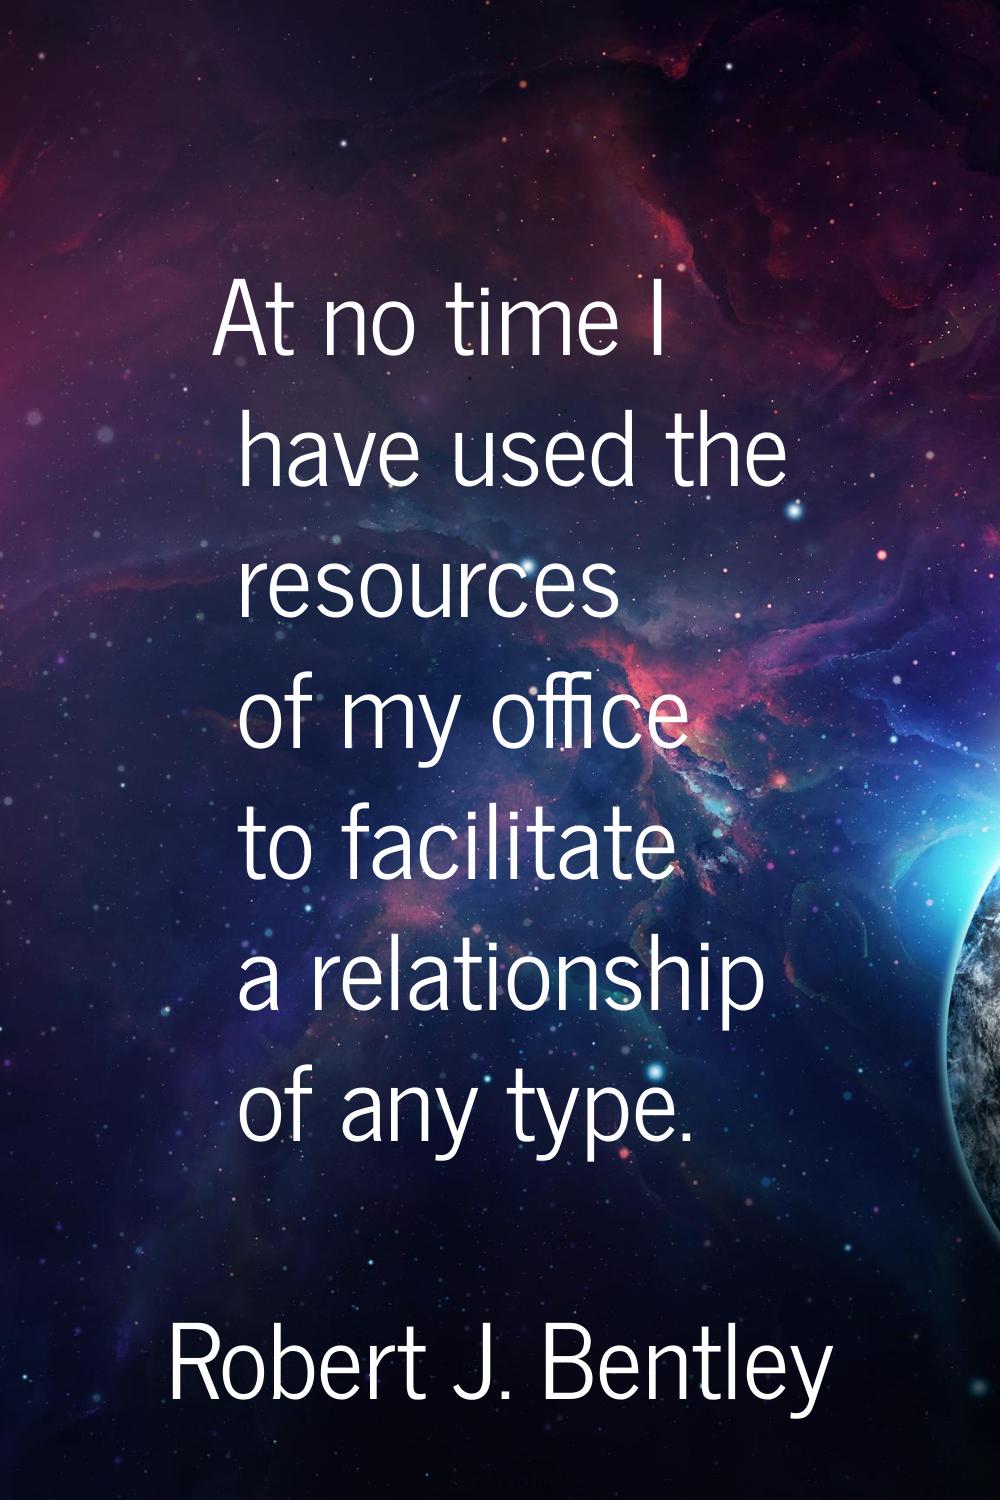 At no time I have used the resources of my office to facilitate a relationship of any type.